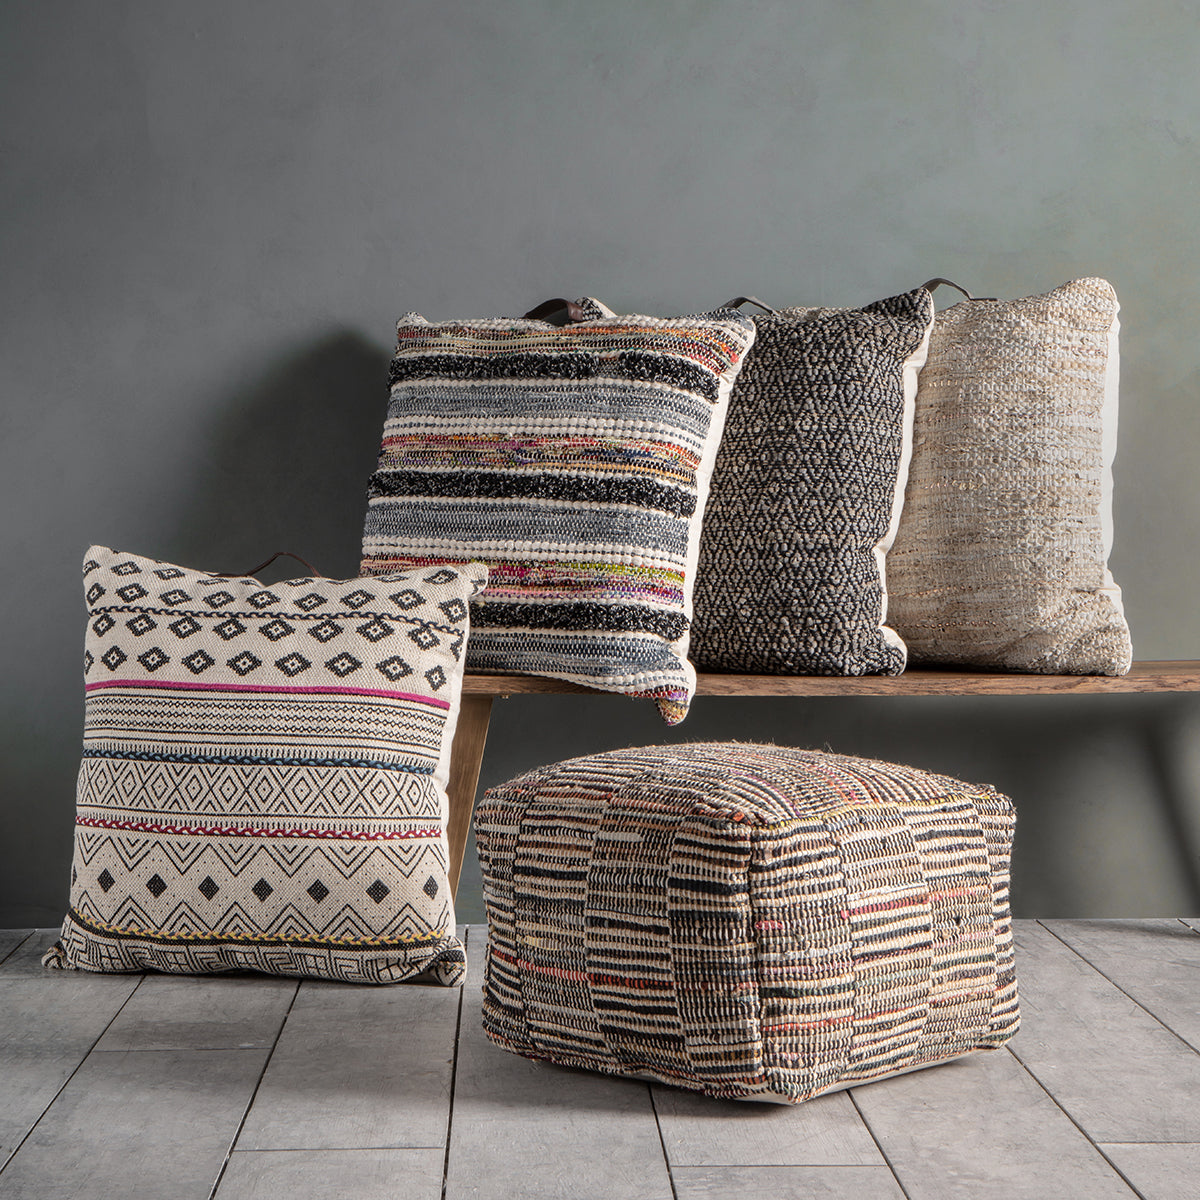 A collection of Aveton Pouffe Multi pillows arranged on a bench, adding a touch of interior decor to the home furniture setup.